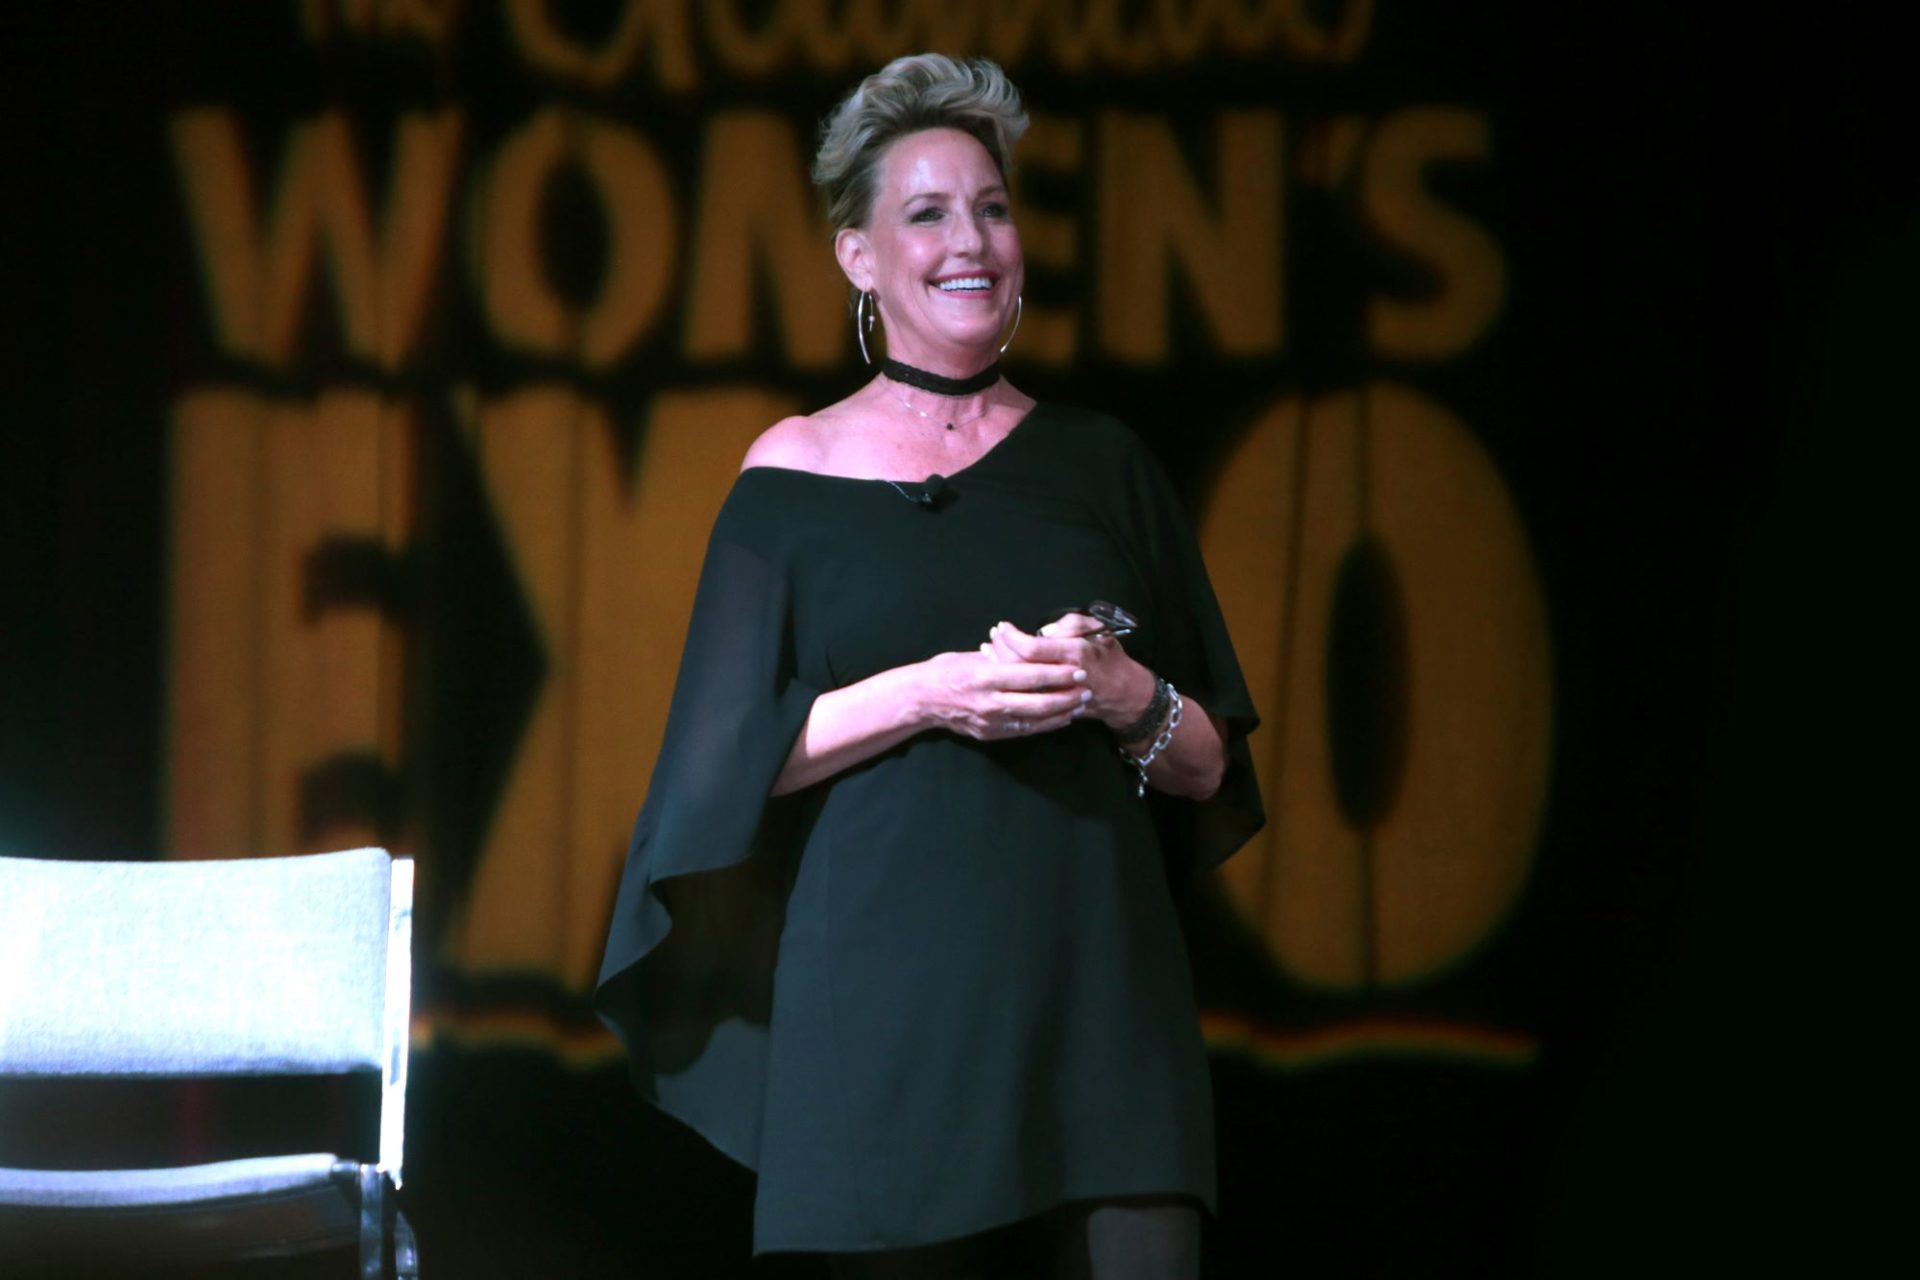 A white woman with blond hair is standing on a stage. She is wearing a black dress, and smiling out at the audience.